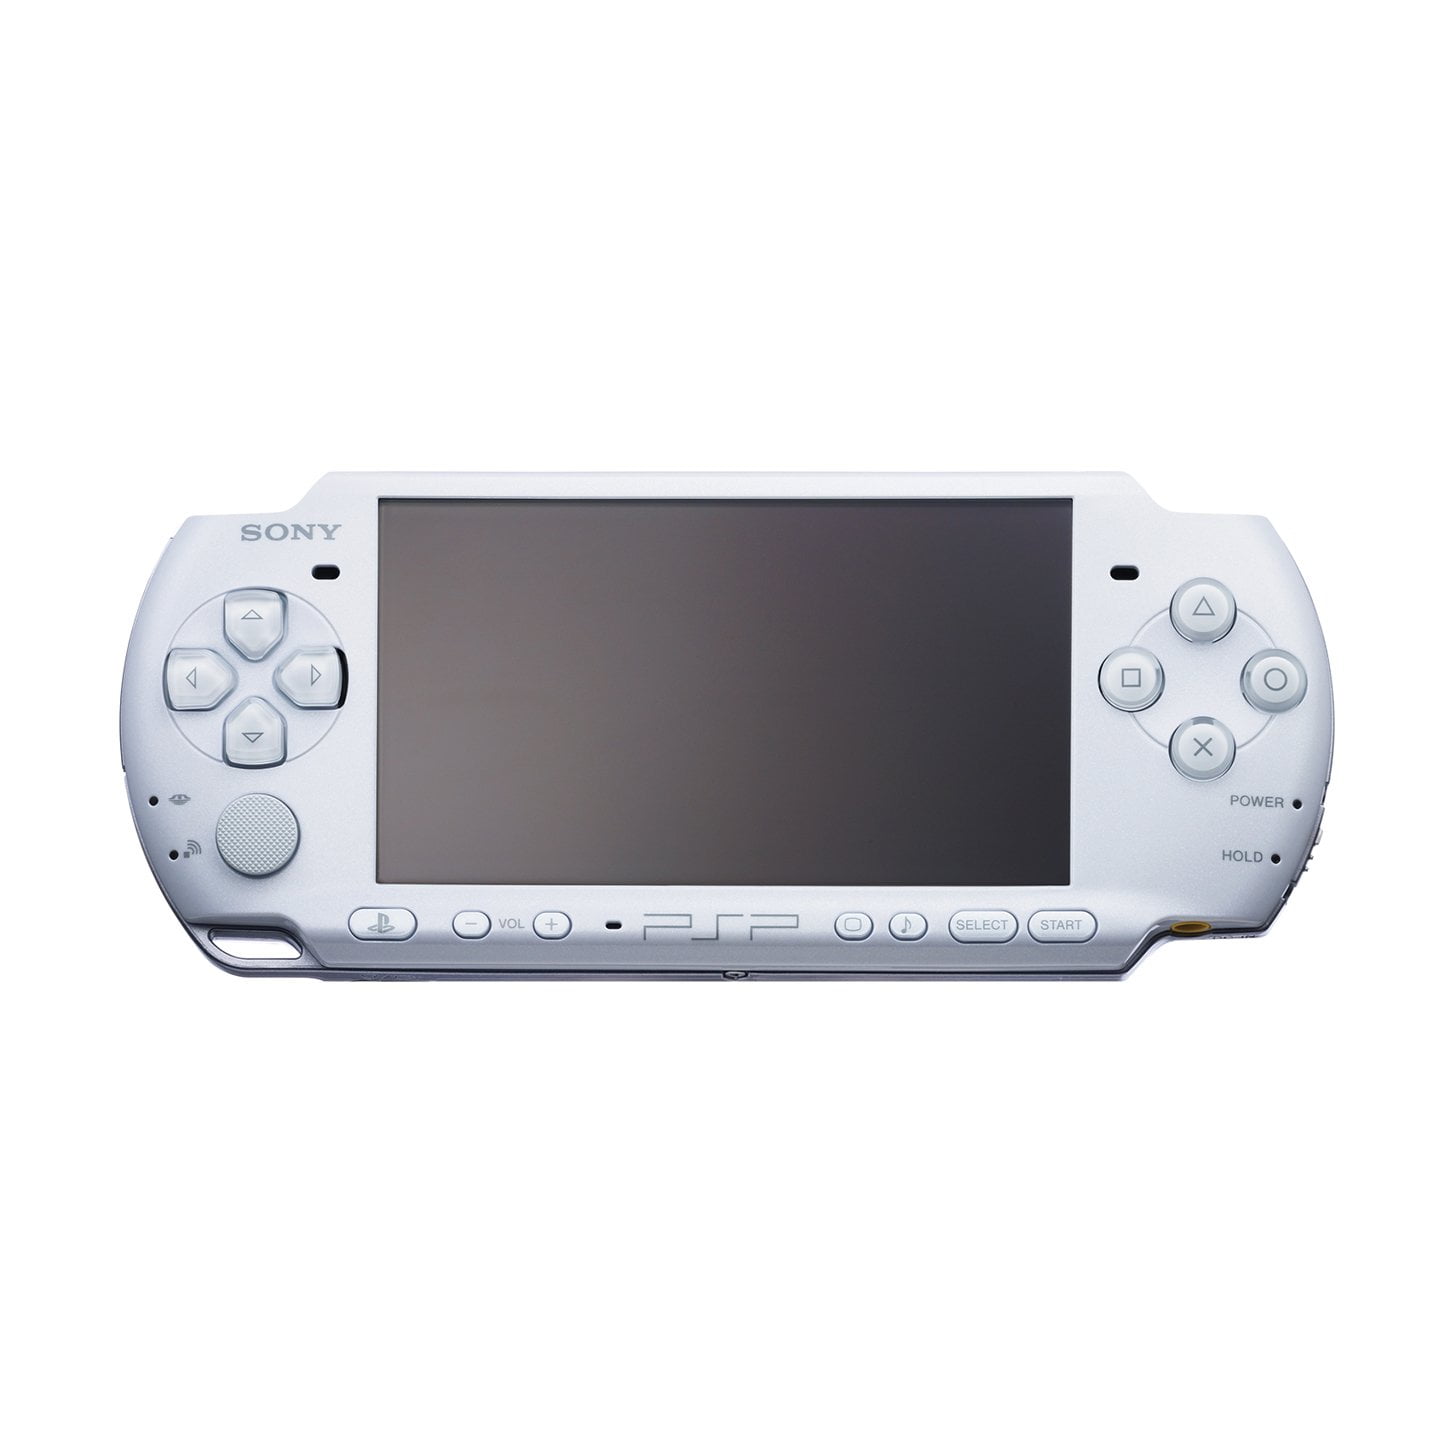 Sony Playstation Portable PSP 3000 Series Handheld Gaming Console System  (Black) (Renewed)